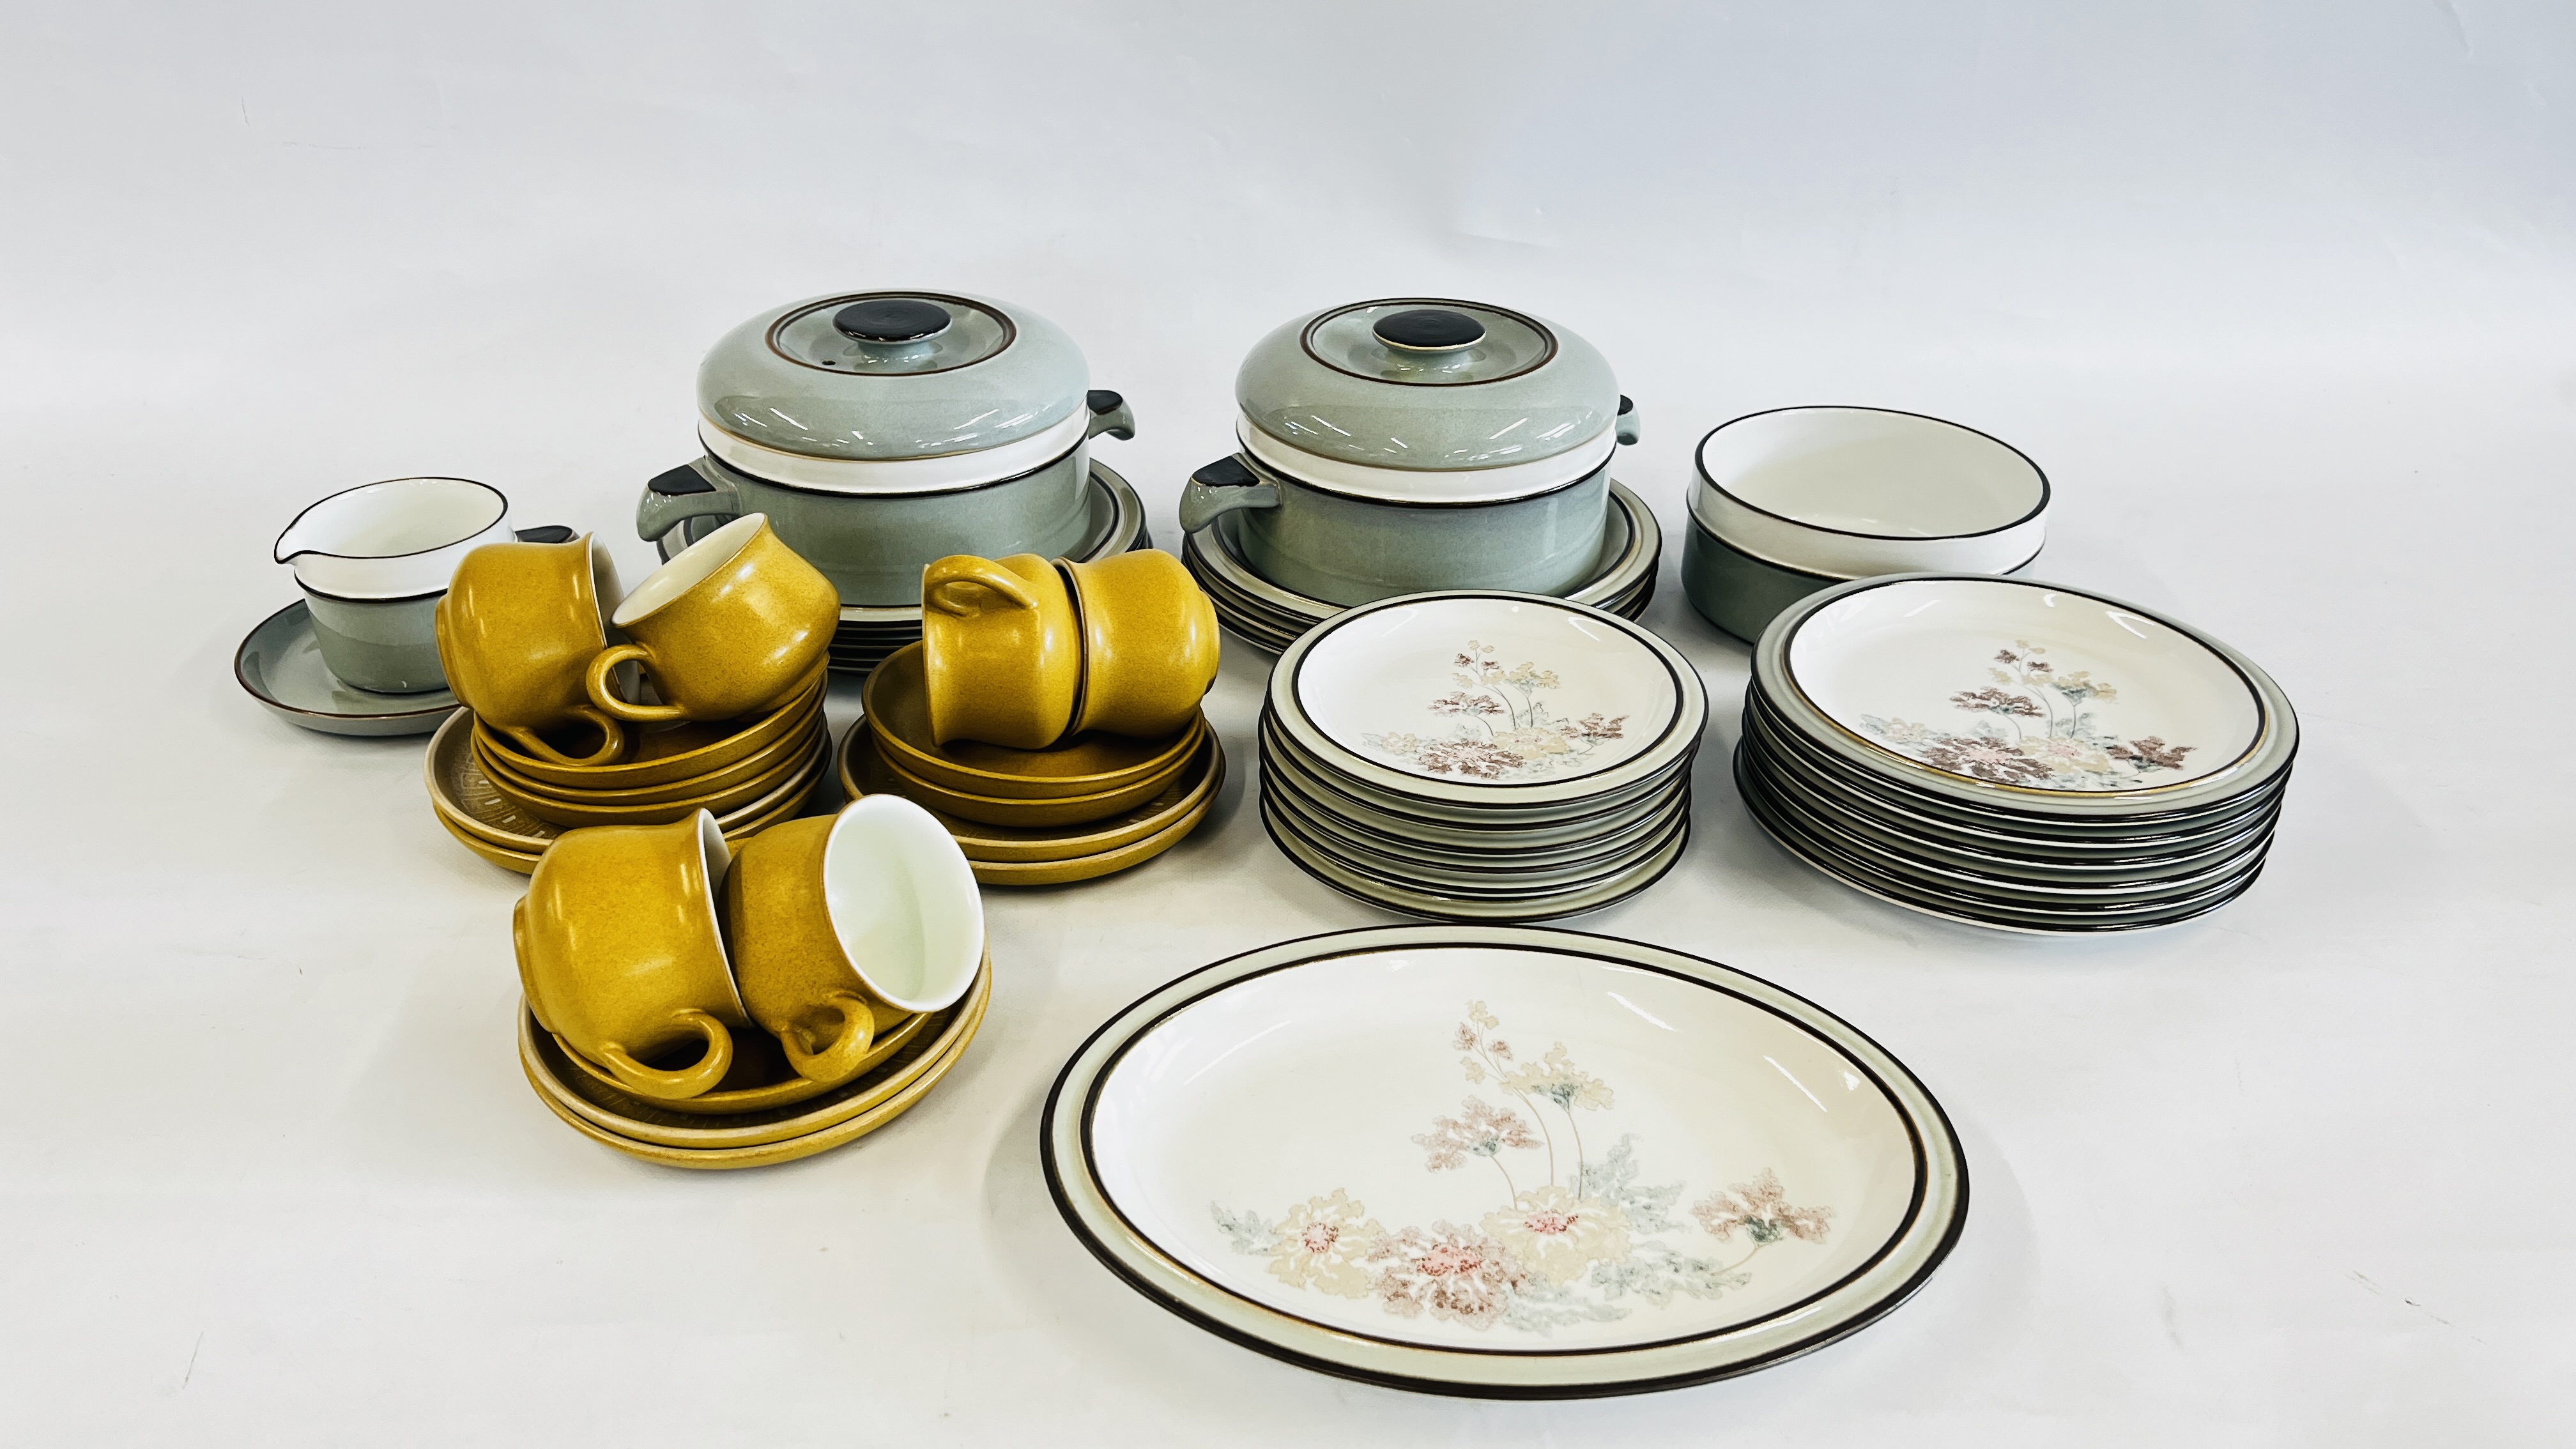 A QUANTITY OF DENBY "ROMANCE" DINNERWARE APPROX 23 PIECES (OVAL PLATE A/F) ALONG WITH A FURTHER 18